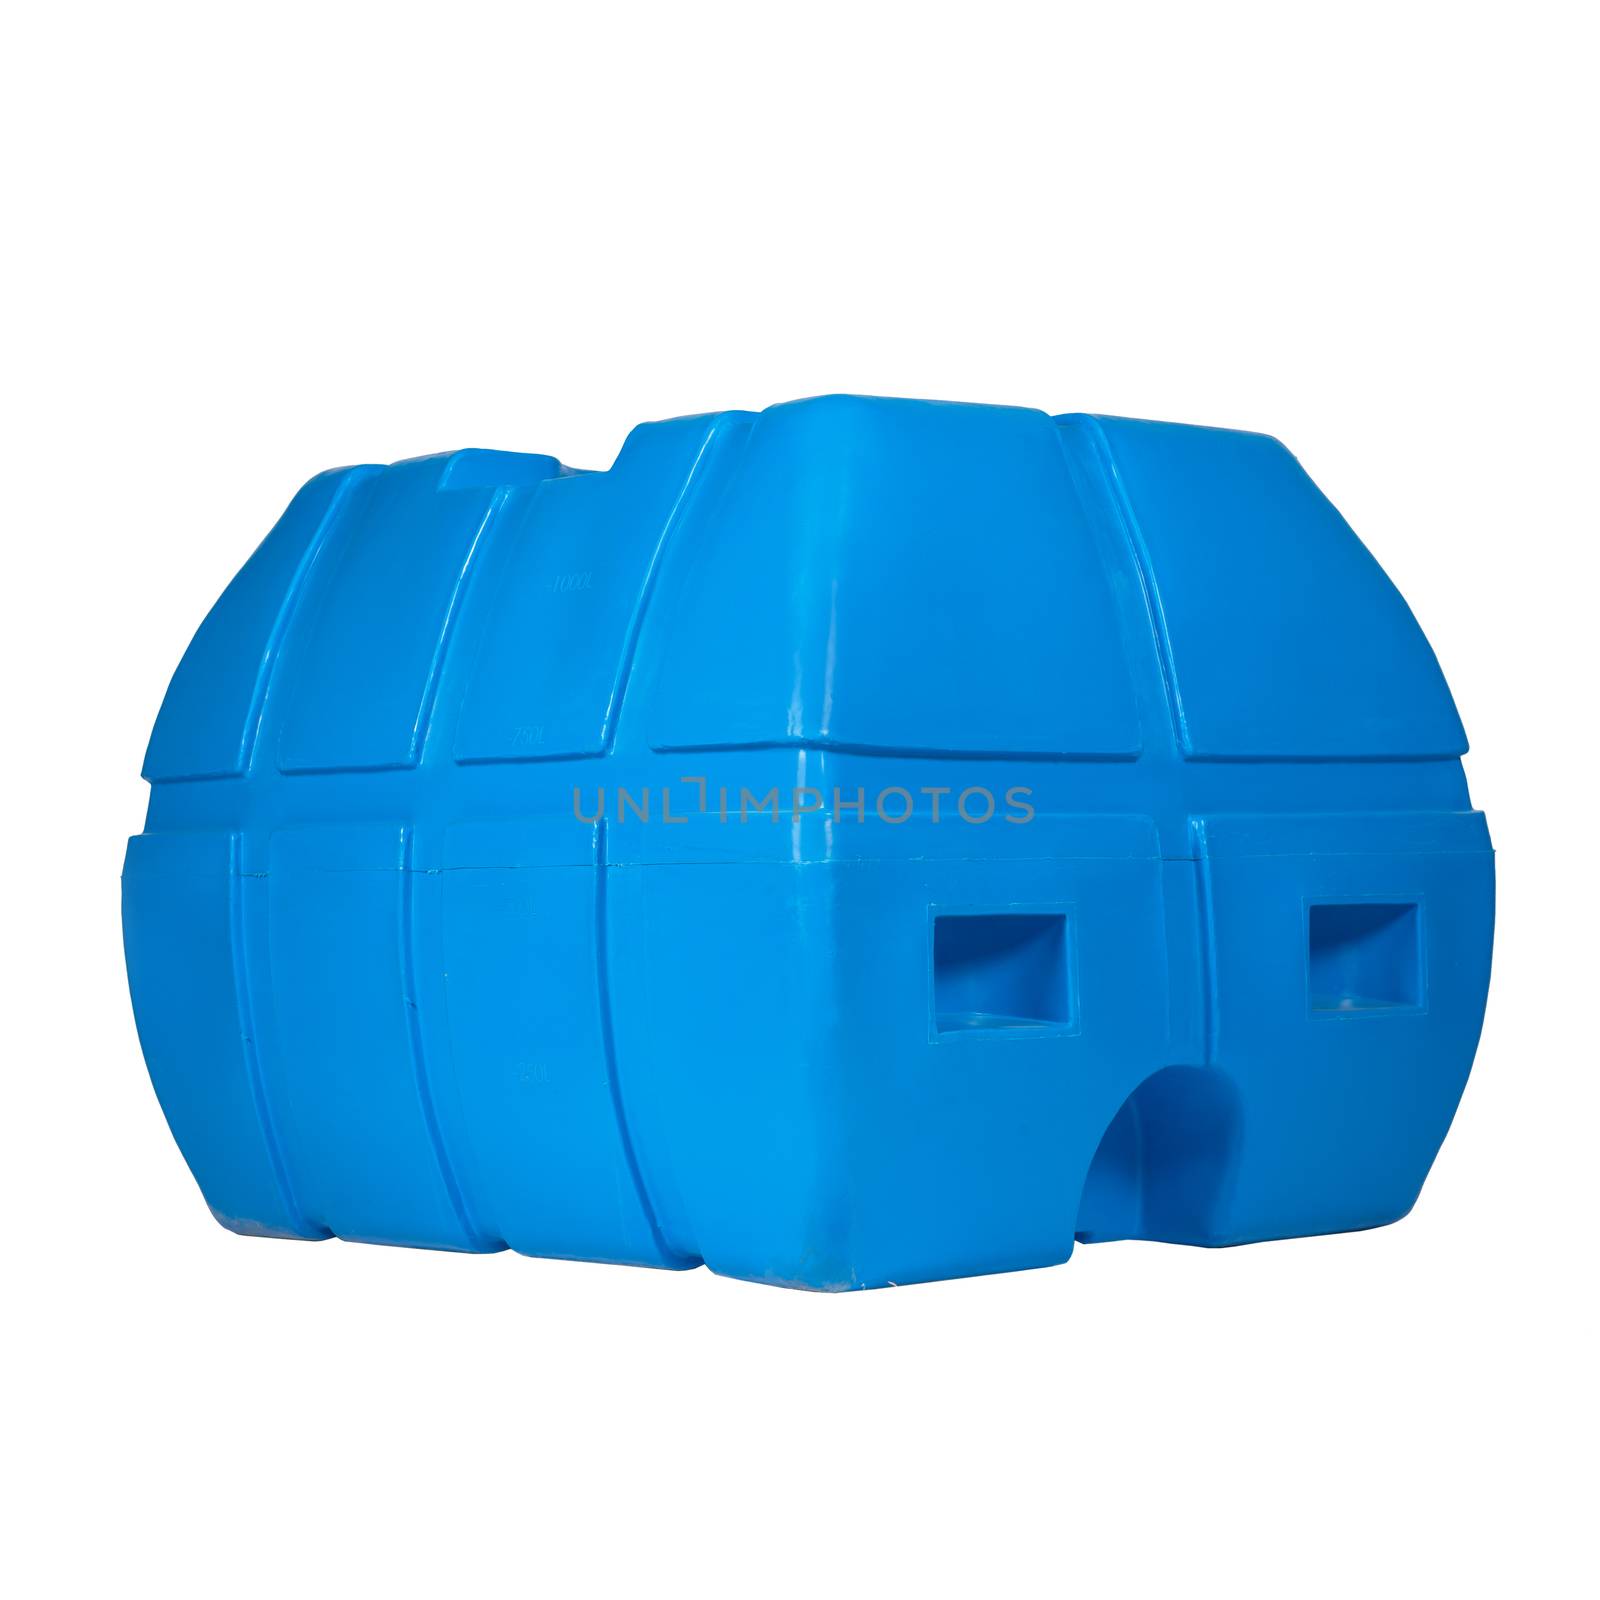 Big polyethylene container of 600 l. for accumulation, storage and transportation of not only technical or drinking water, but also a variety of dry and liquid food products, as well as oils and chemicals.